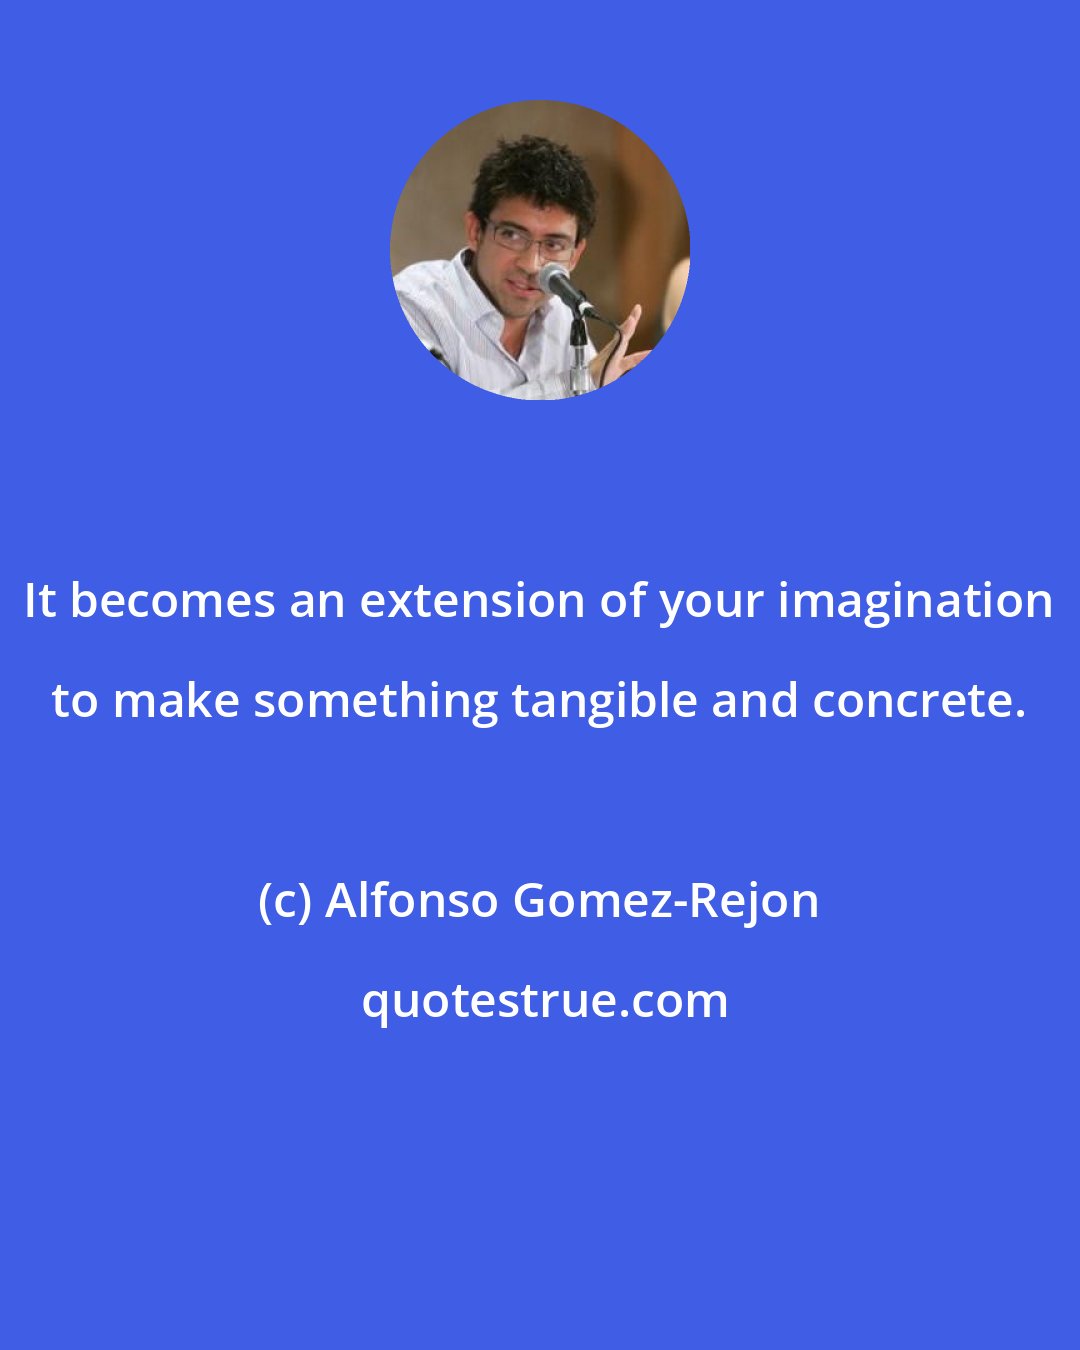 Alfonso Gomez-Rejon: It becomes an extension of your imagination to make something tangible and concrete.